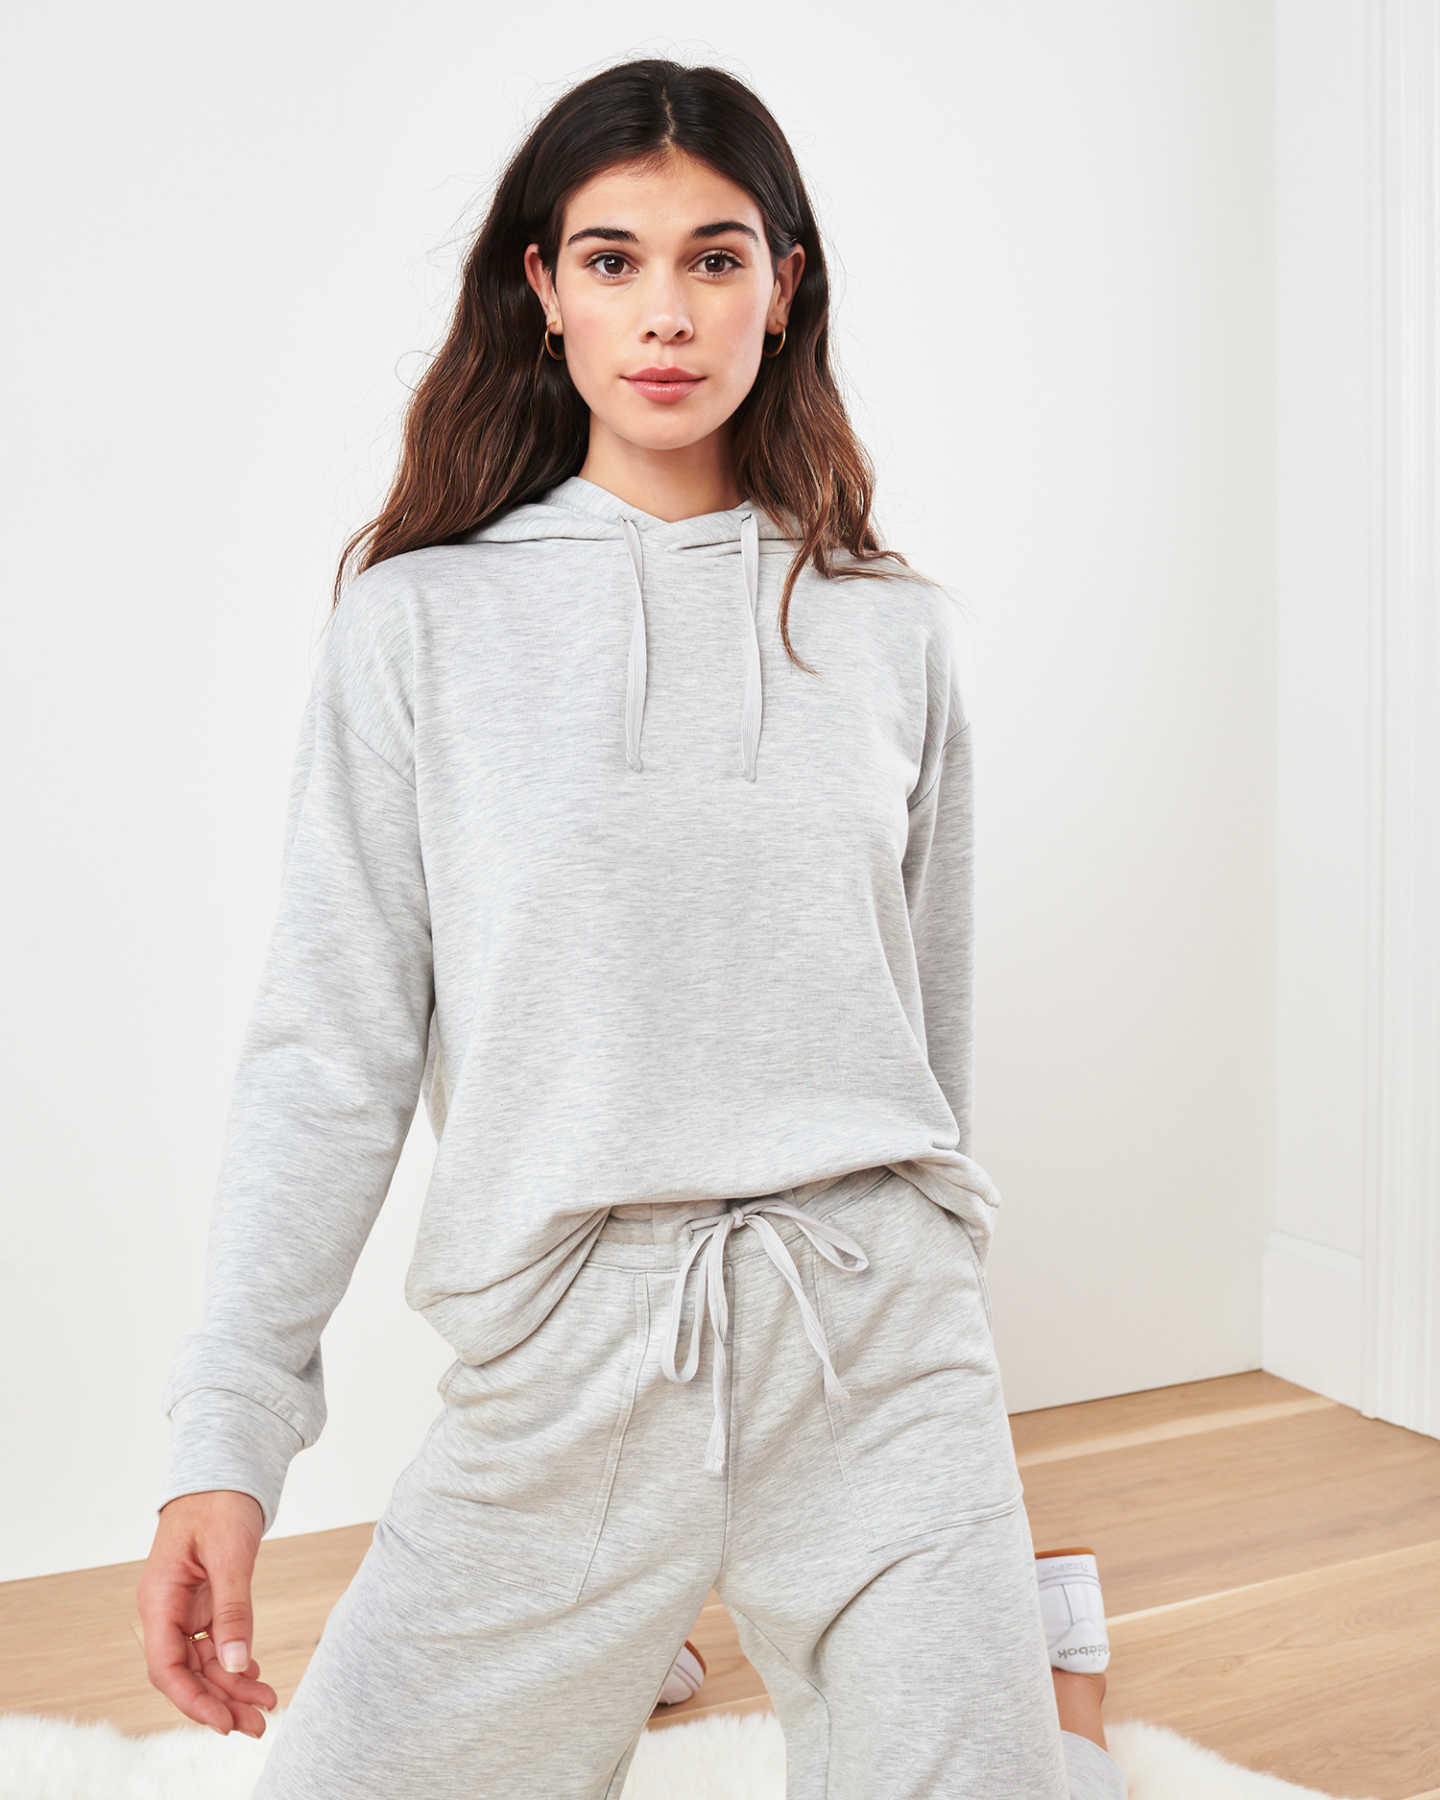 Sweatshirt And Sweatpants Set For Women 2 Piece Jogger Outfit